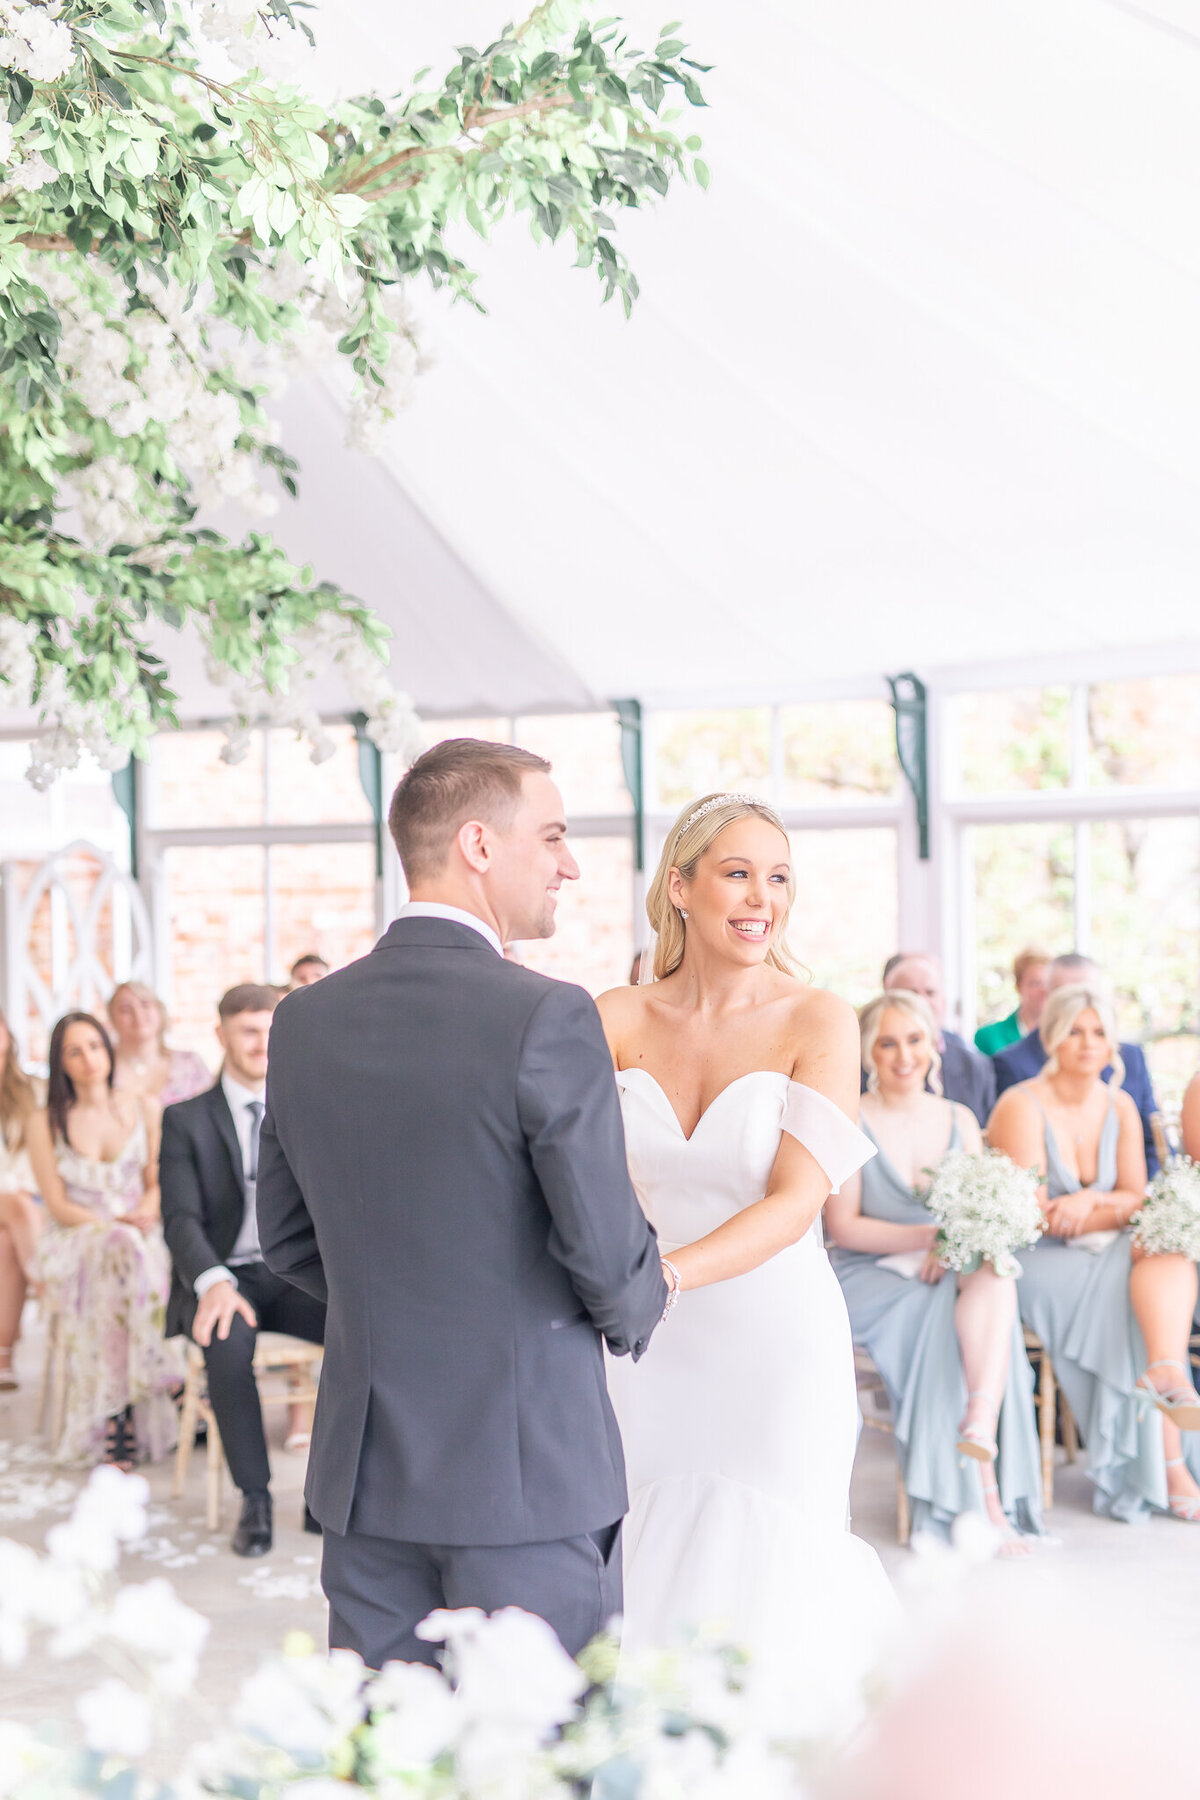 Bride and groom facing eachother holding hands during their ceremony in the glass house